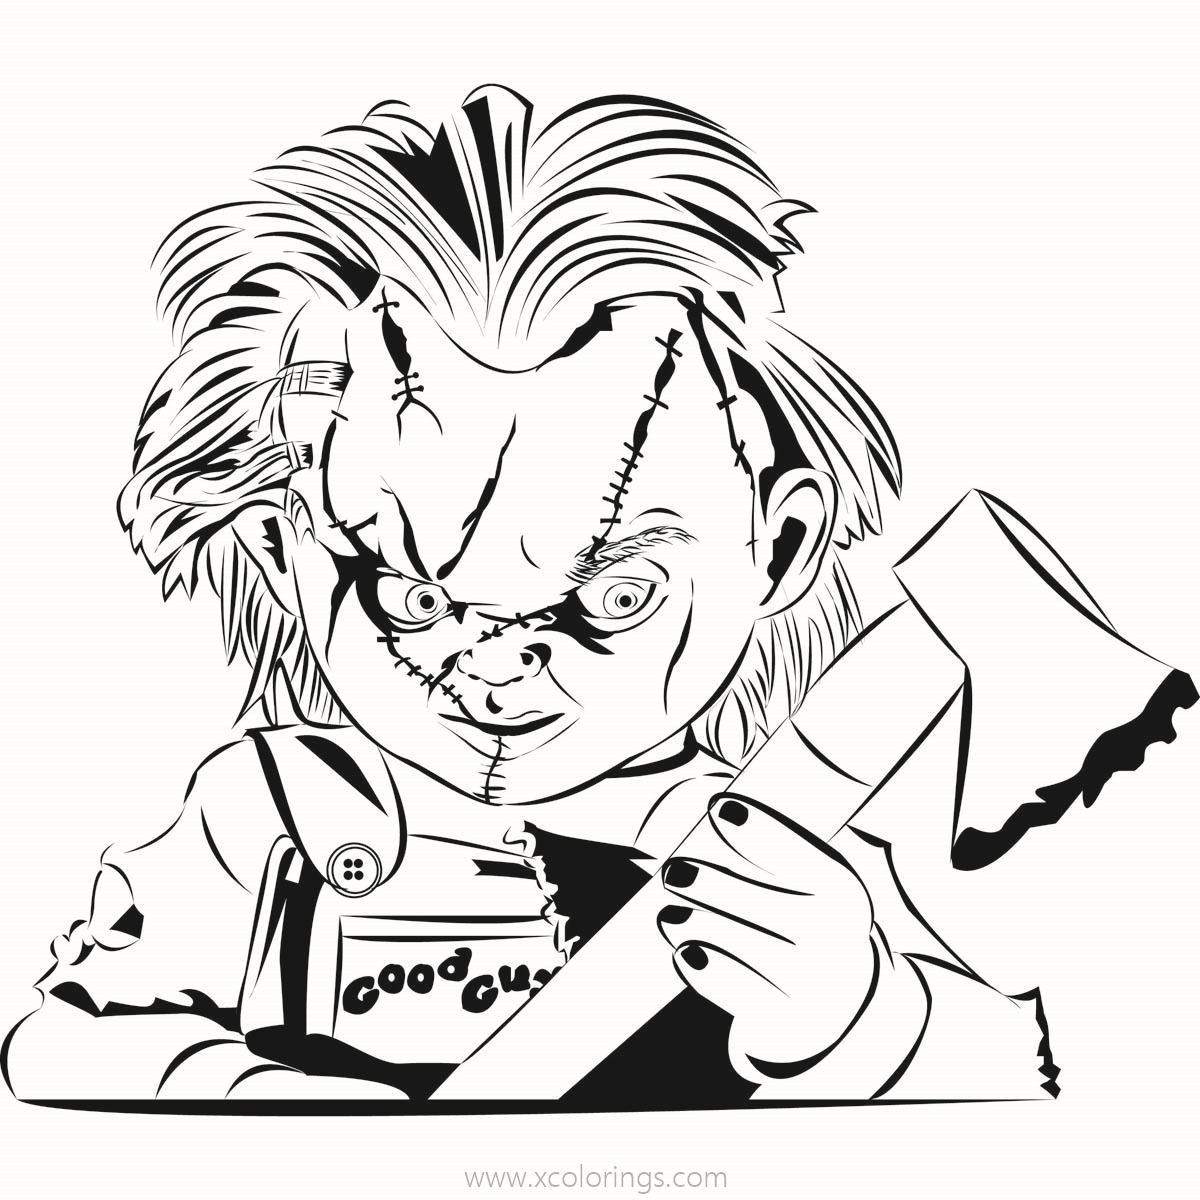 Free Chucky Coloring Pages with Axes printable